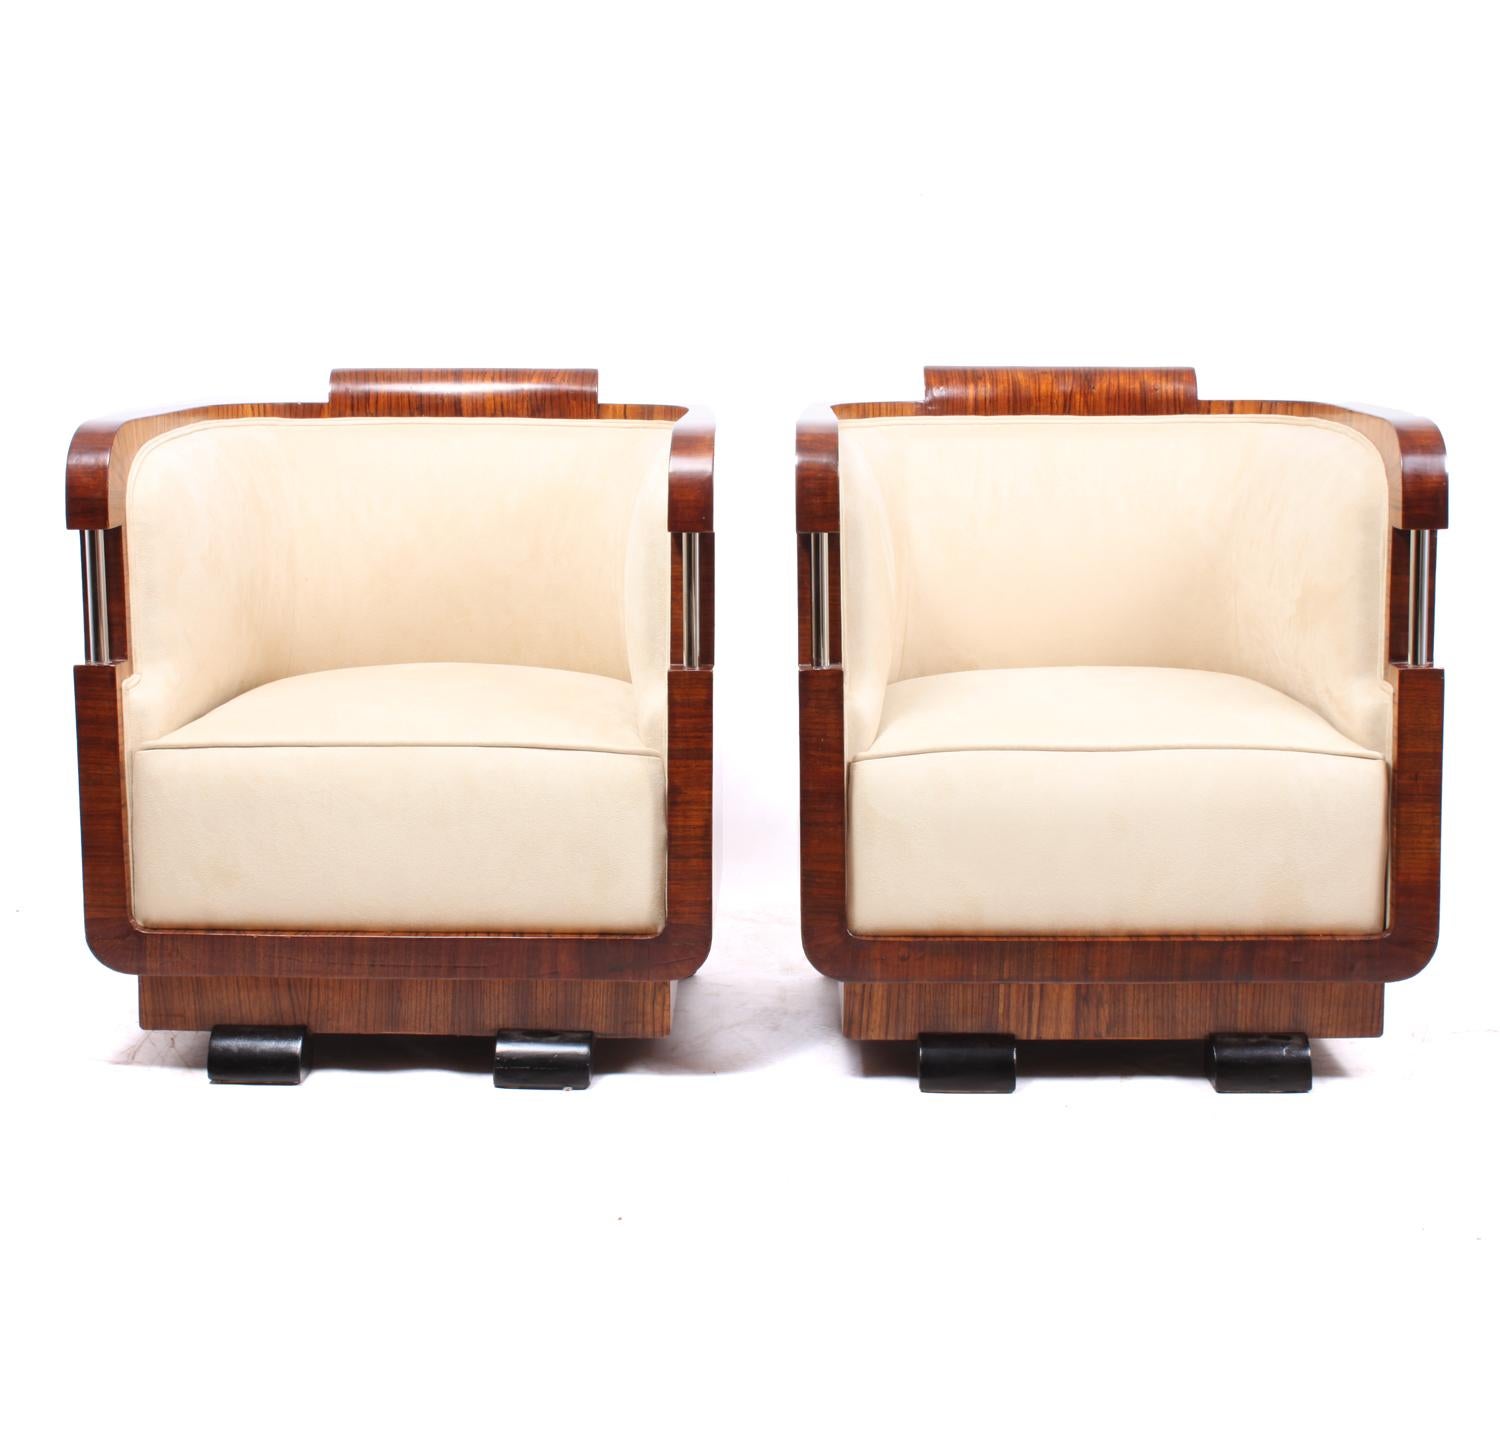 Early 20th Century Pair of Italian Art Deco Armchairs and Stools